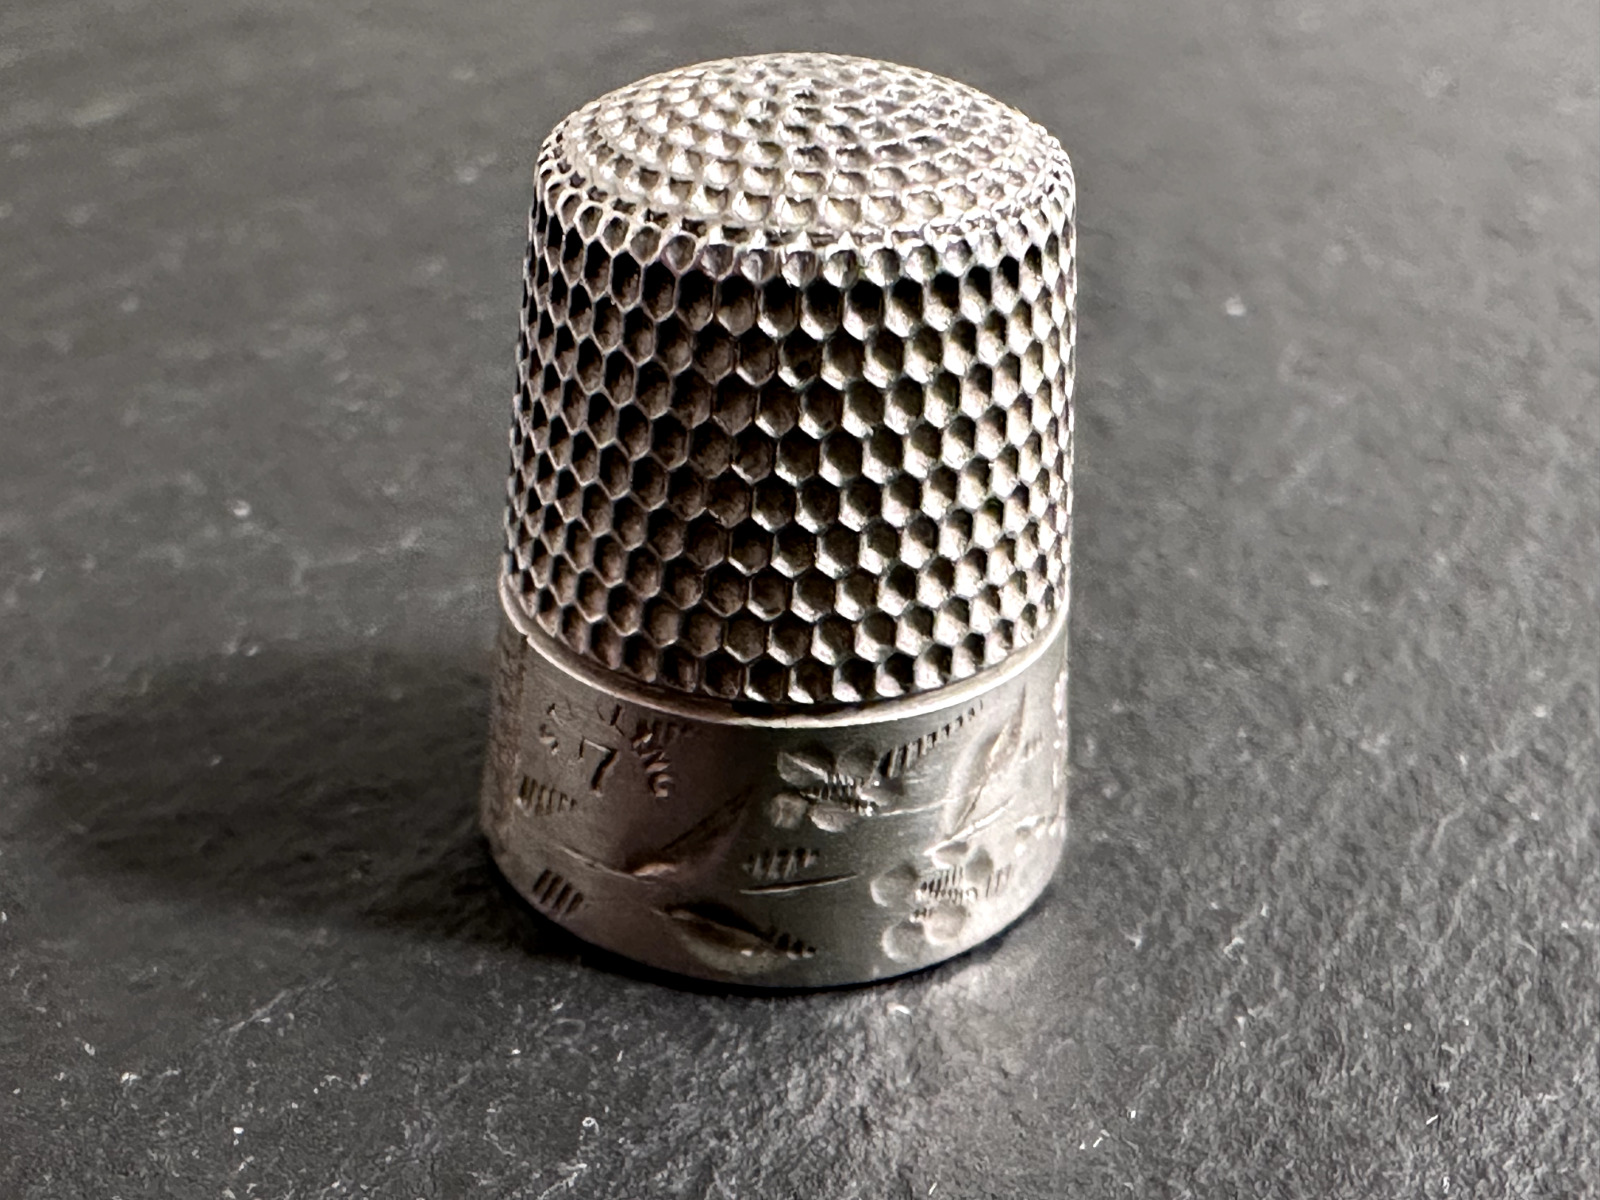 ANTIQUE SIMON BROTHERS STERLING SILVER FLORAL MOTIF SIZE 7 THIMBLE